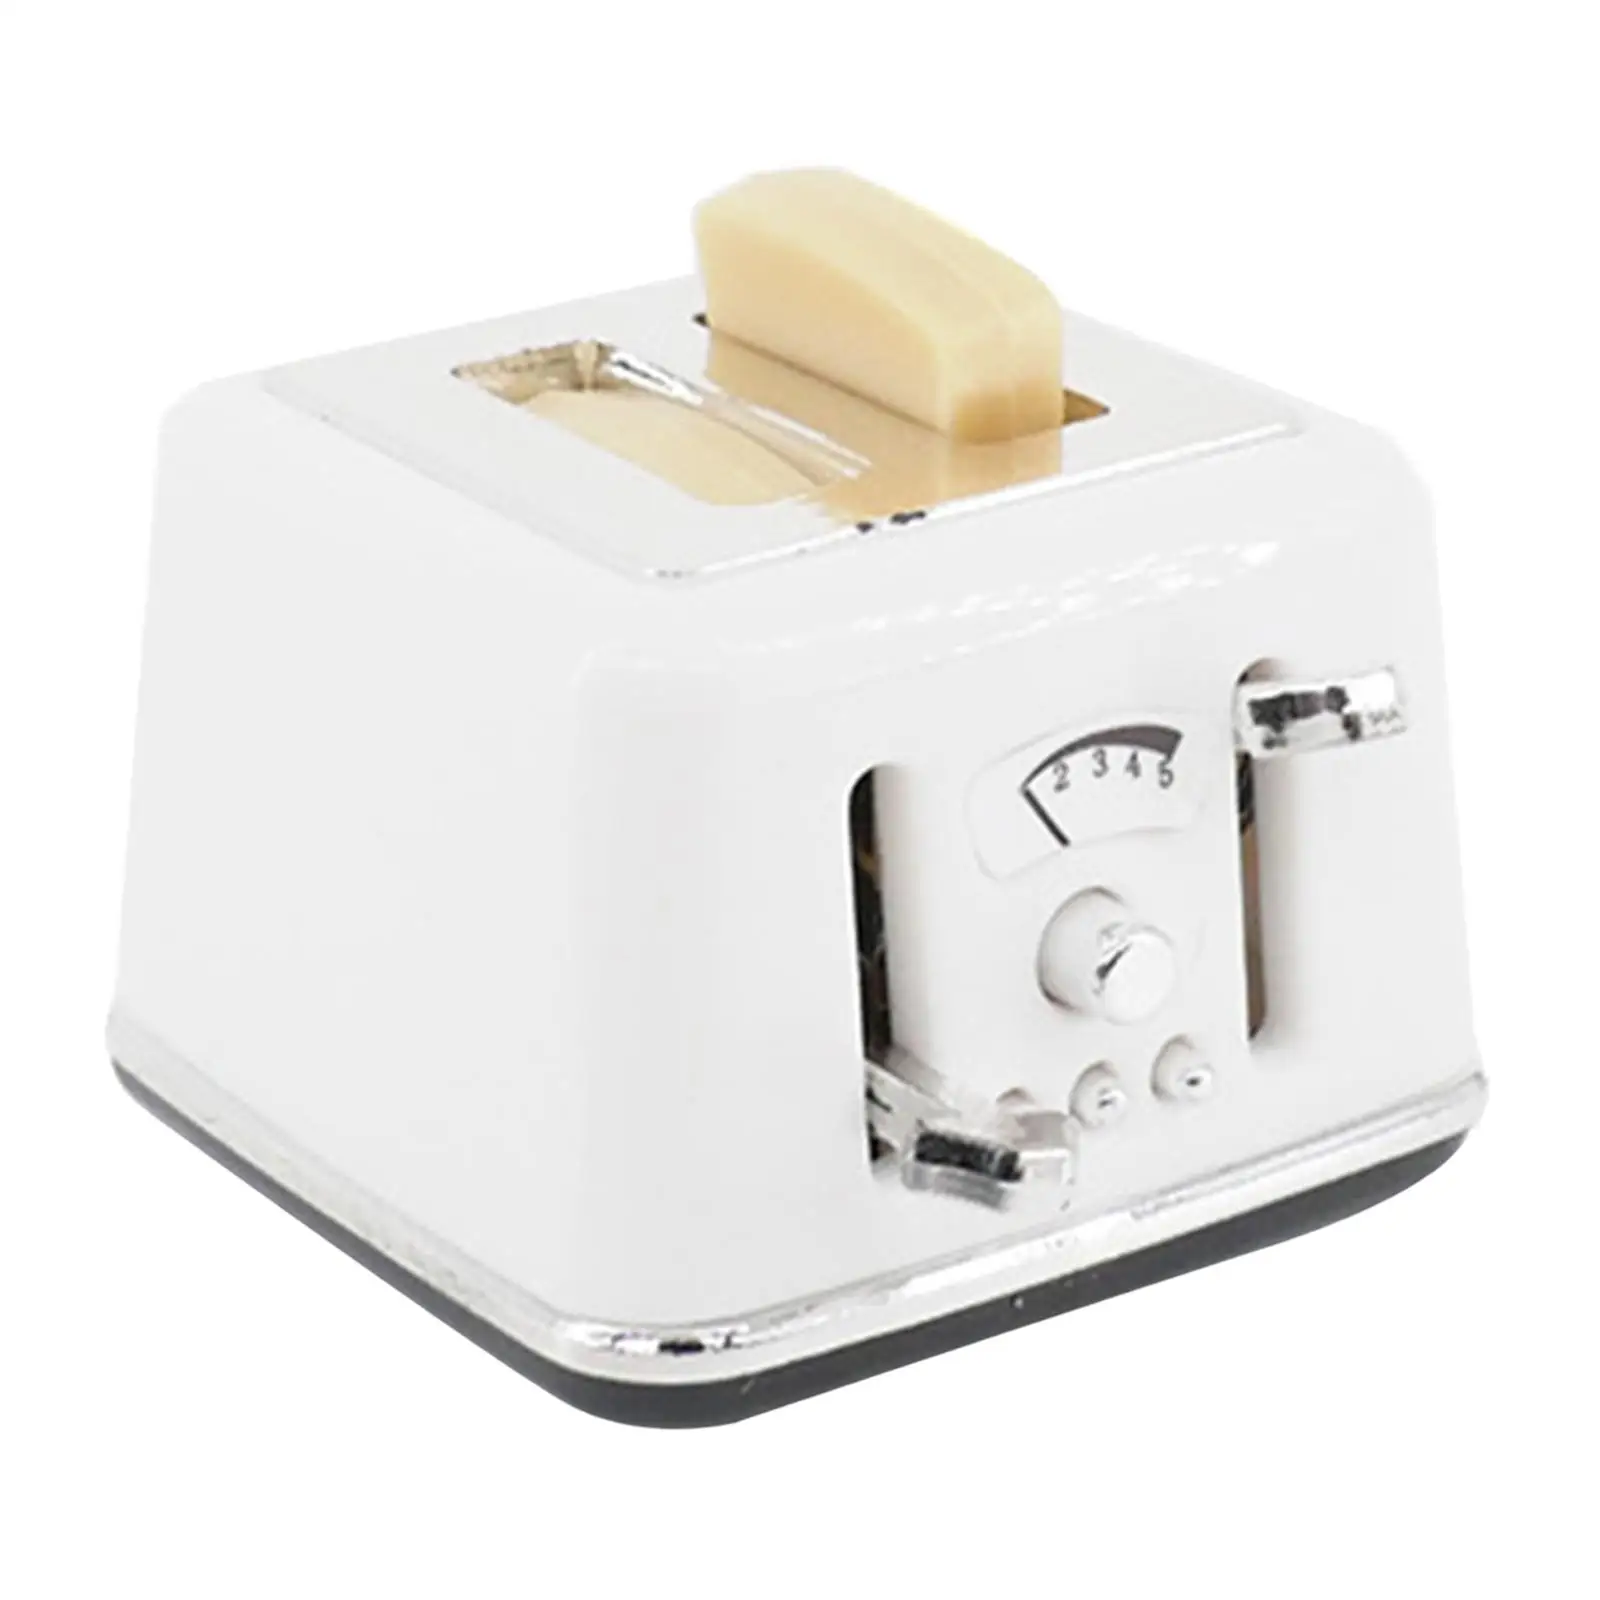 Miniature Toaster Handcrafted Simulated for Kitchen Decoration Replacement